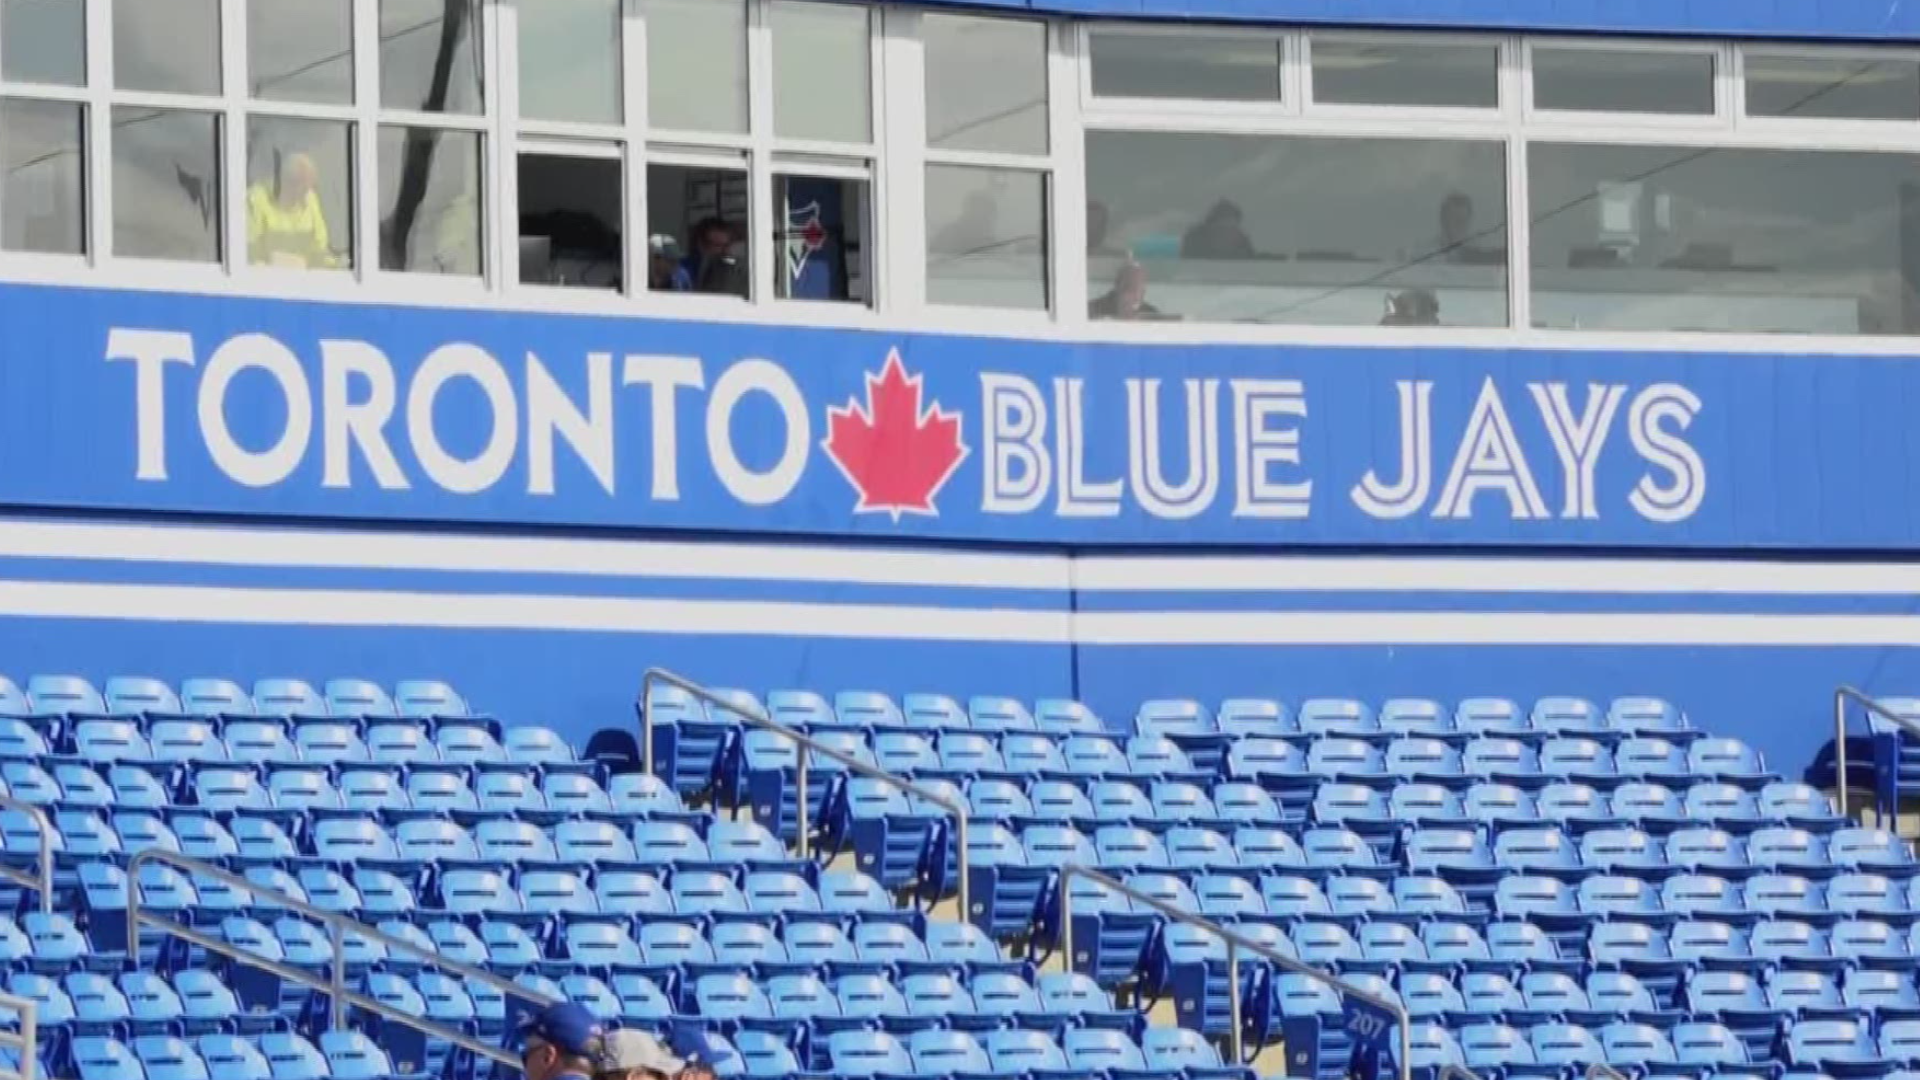 The renovations and upgrades at the ballpark in Dunedin cost more than $100 million.